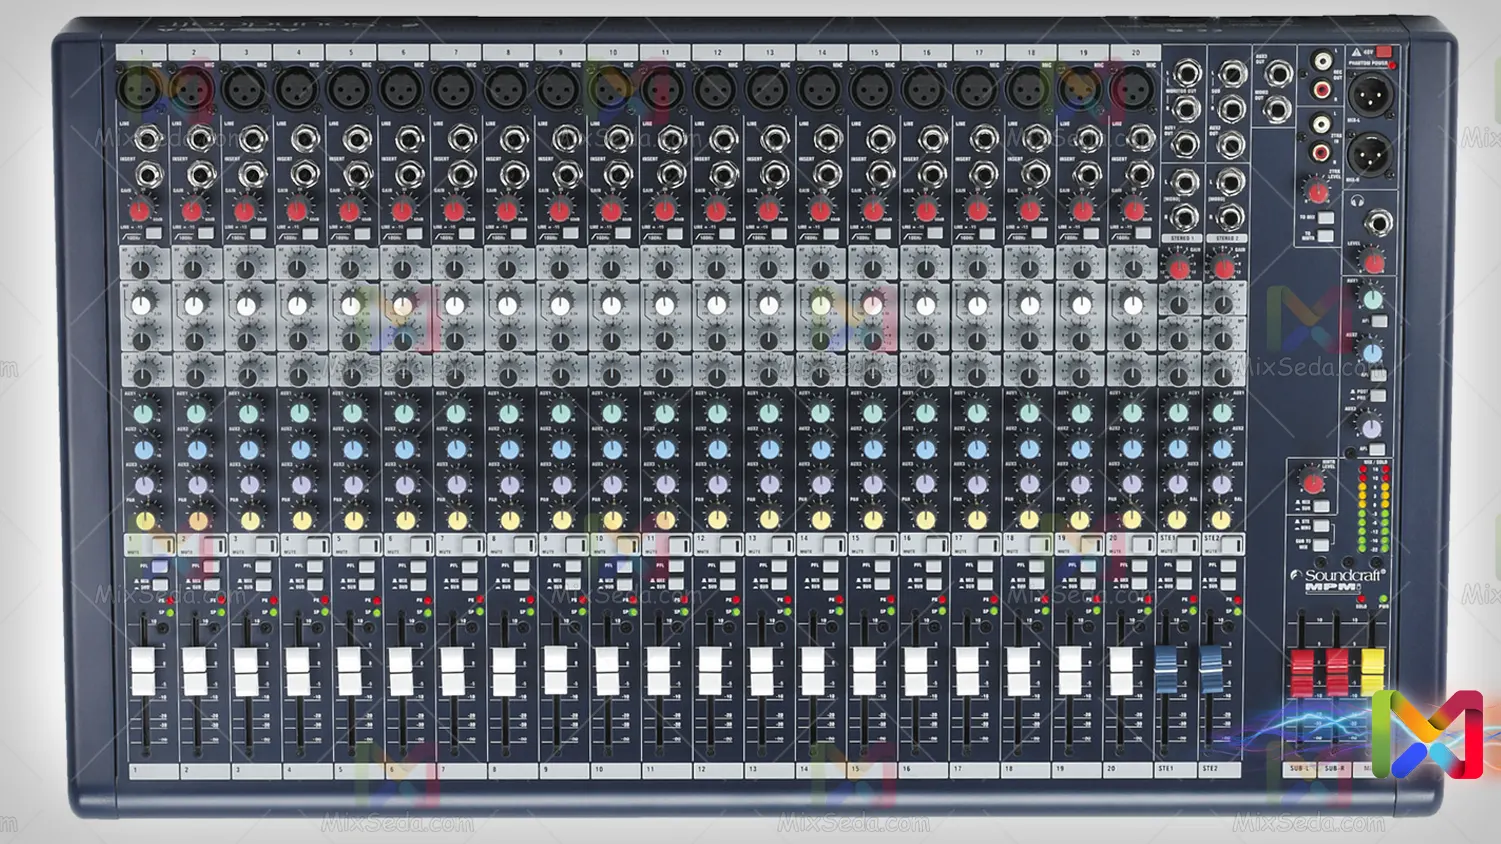 Number of audio channels of the analog mixer